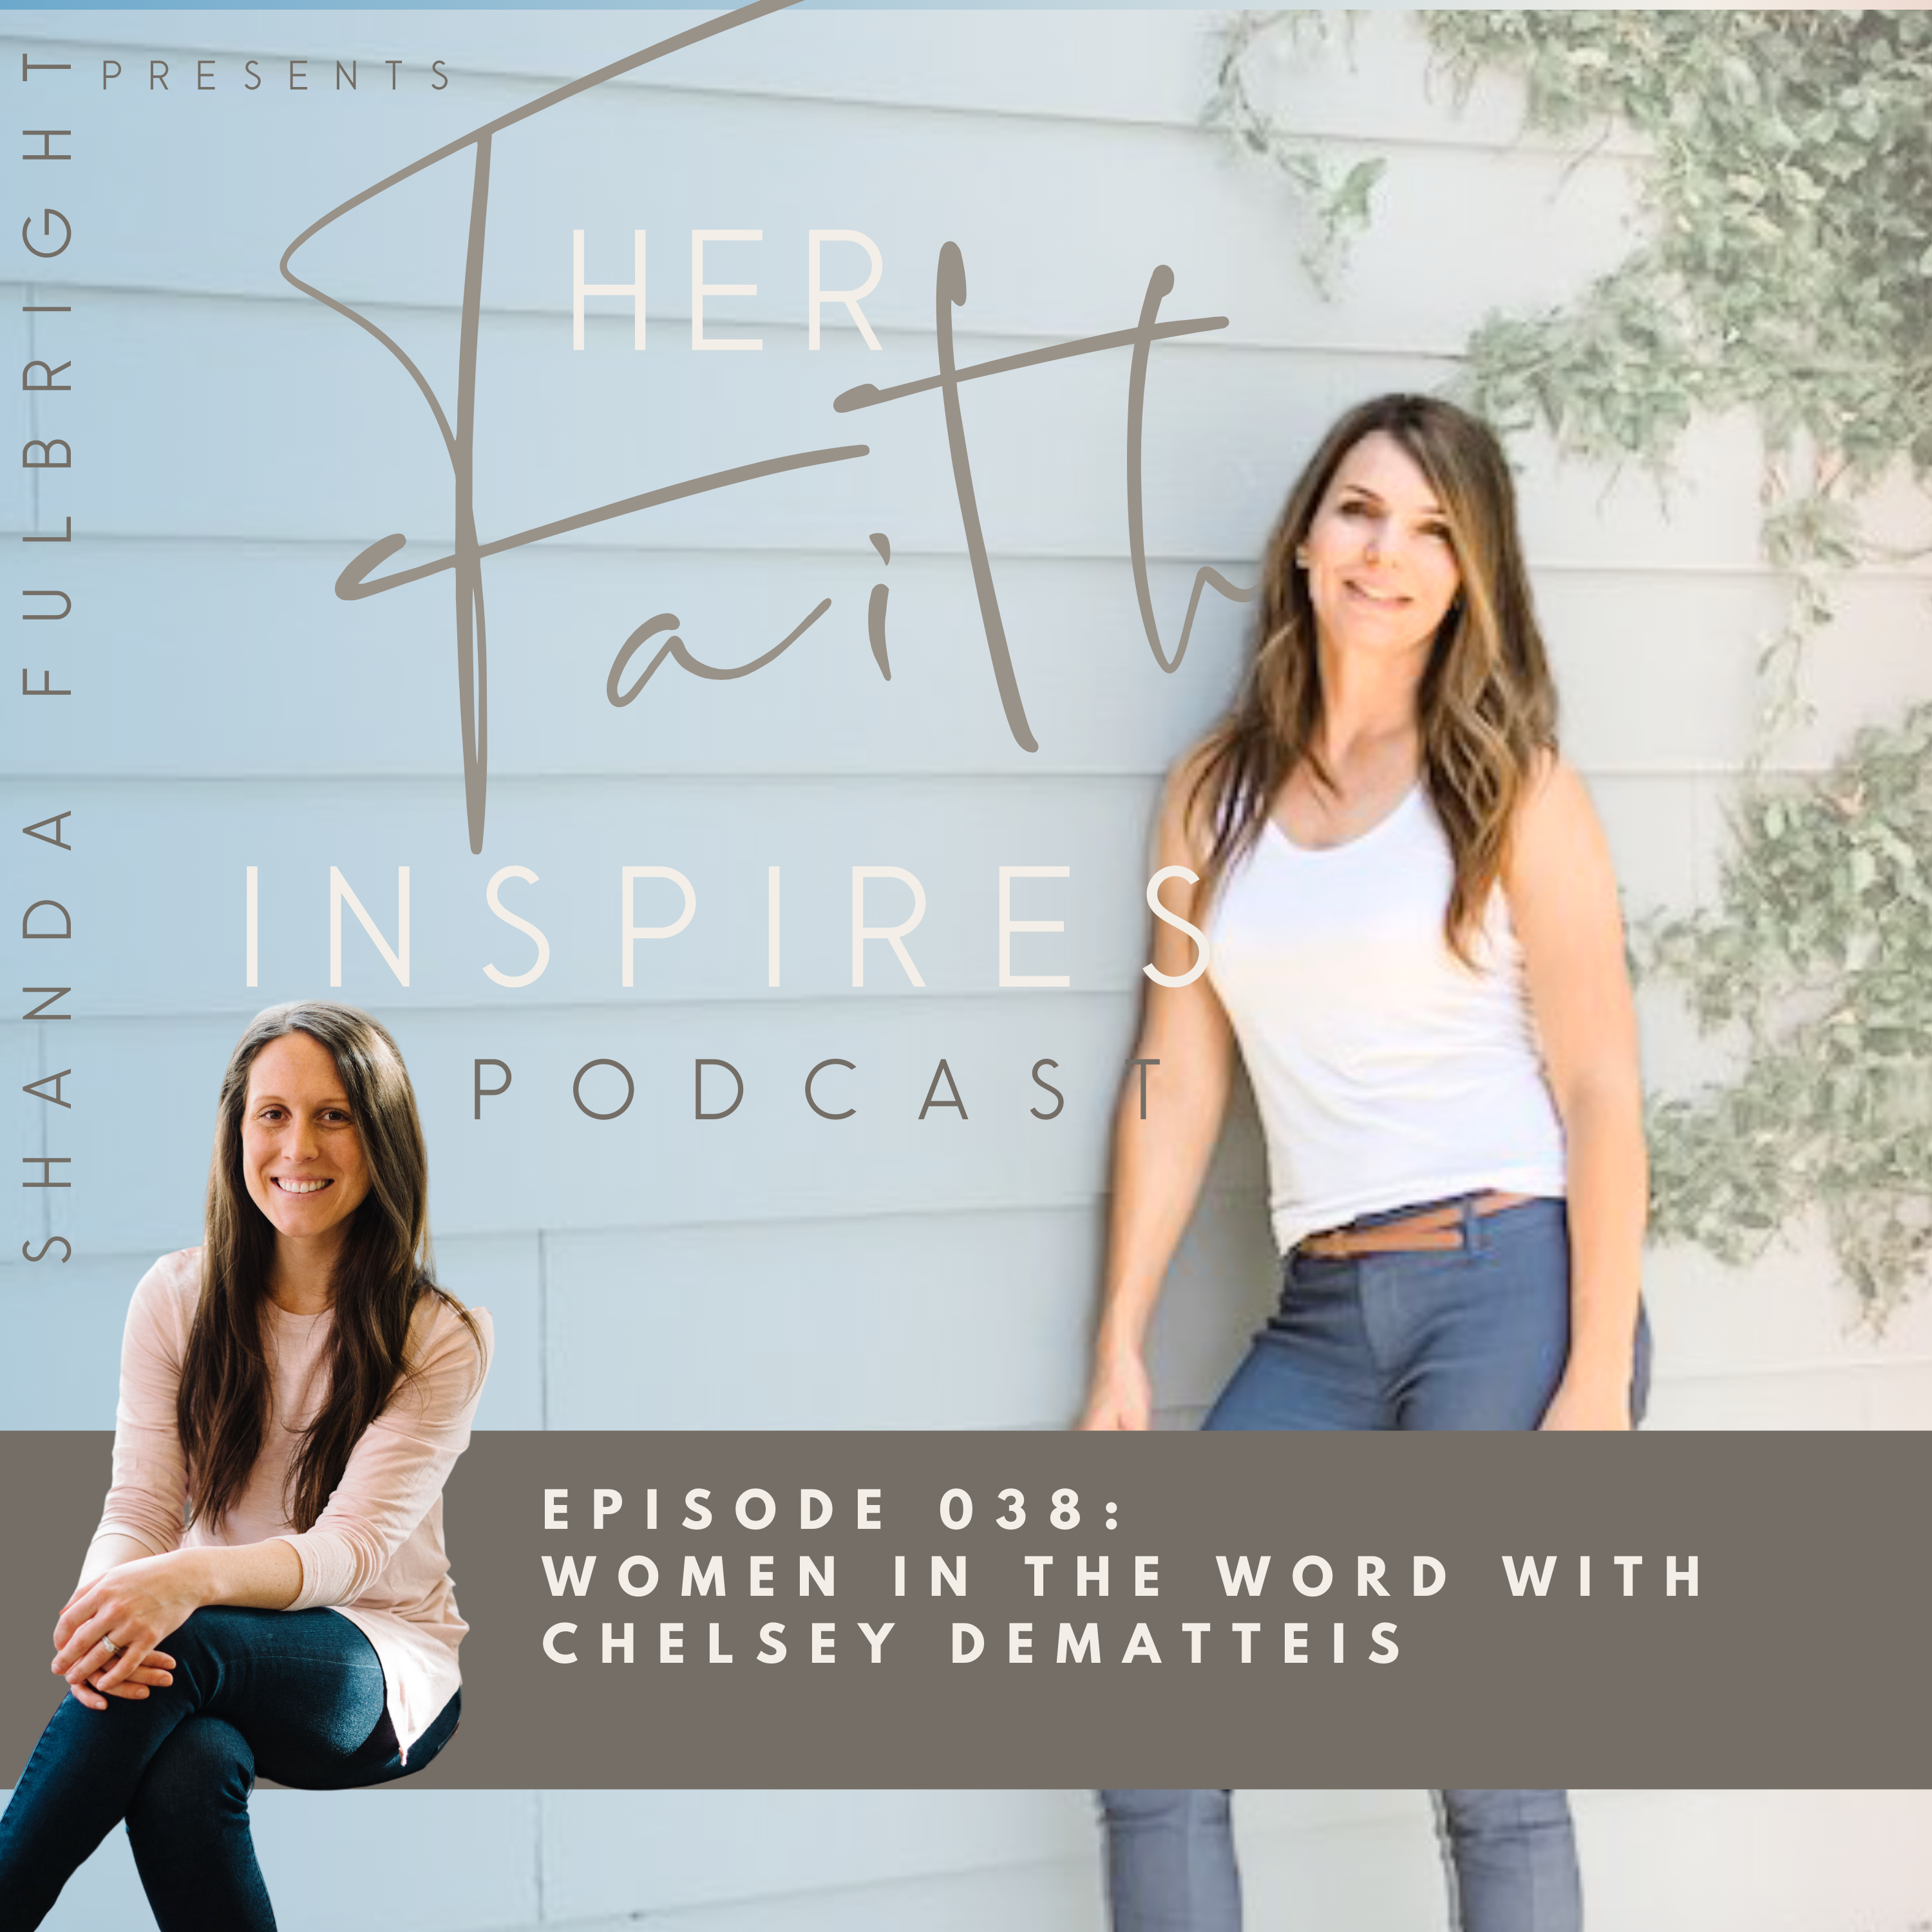 SF Podcast Episode 38 - HER FAITH INSPIRES 038: Women in the Word with Chelsey DeMatteis